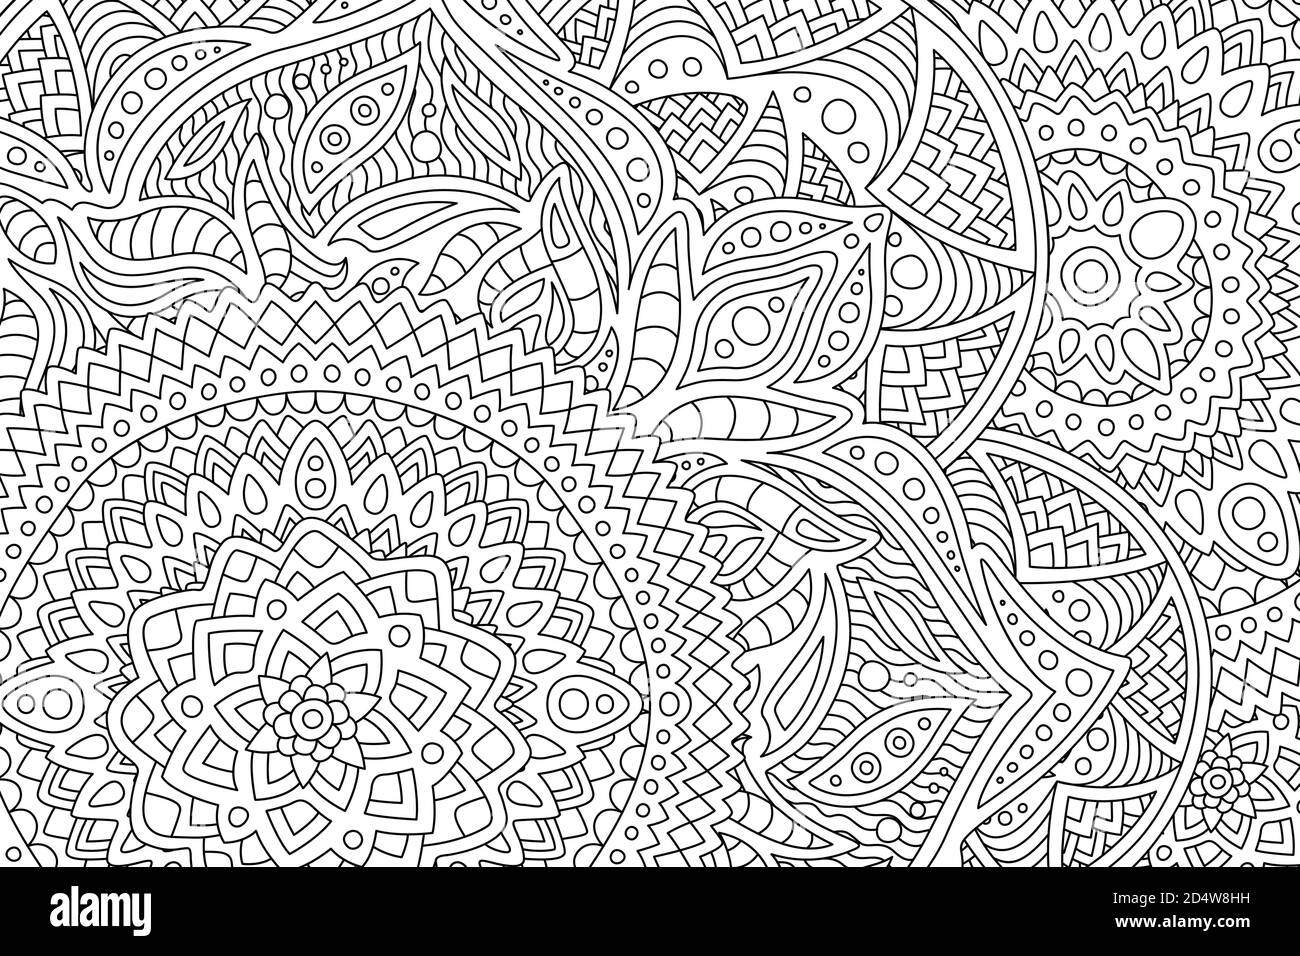 Beautiful adult coloring book page with monochrome detailed ...